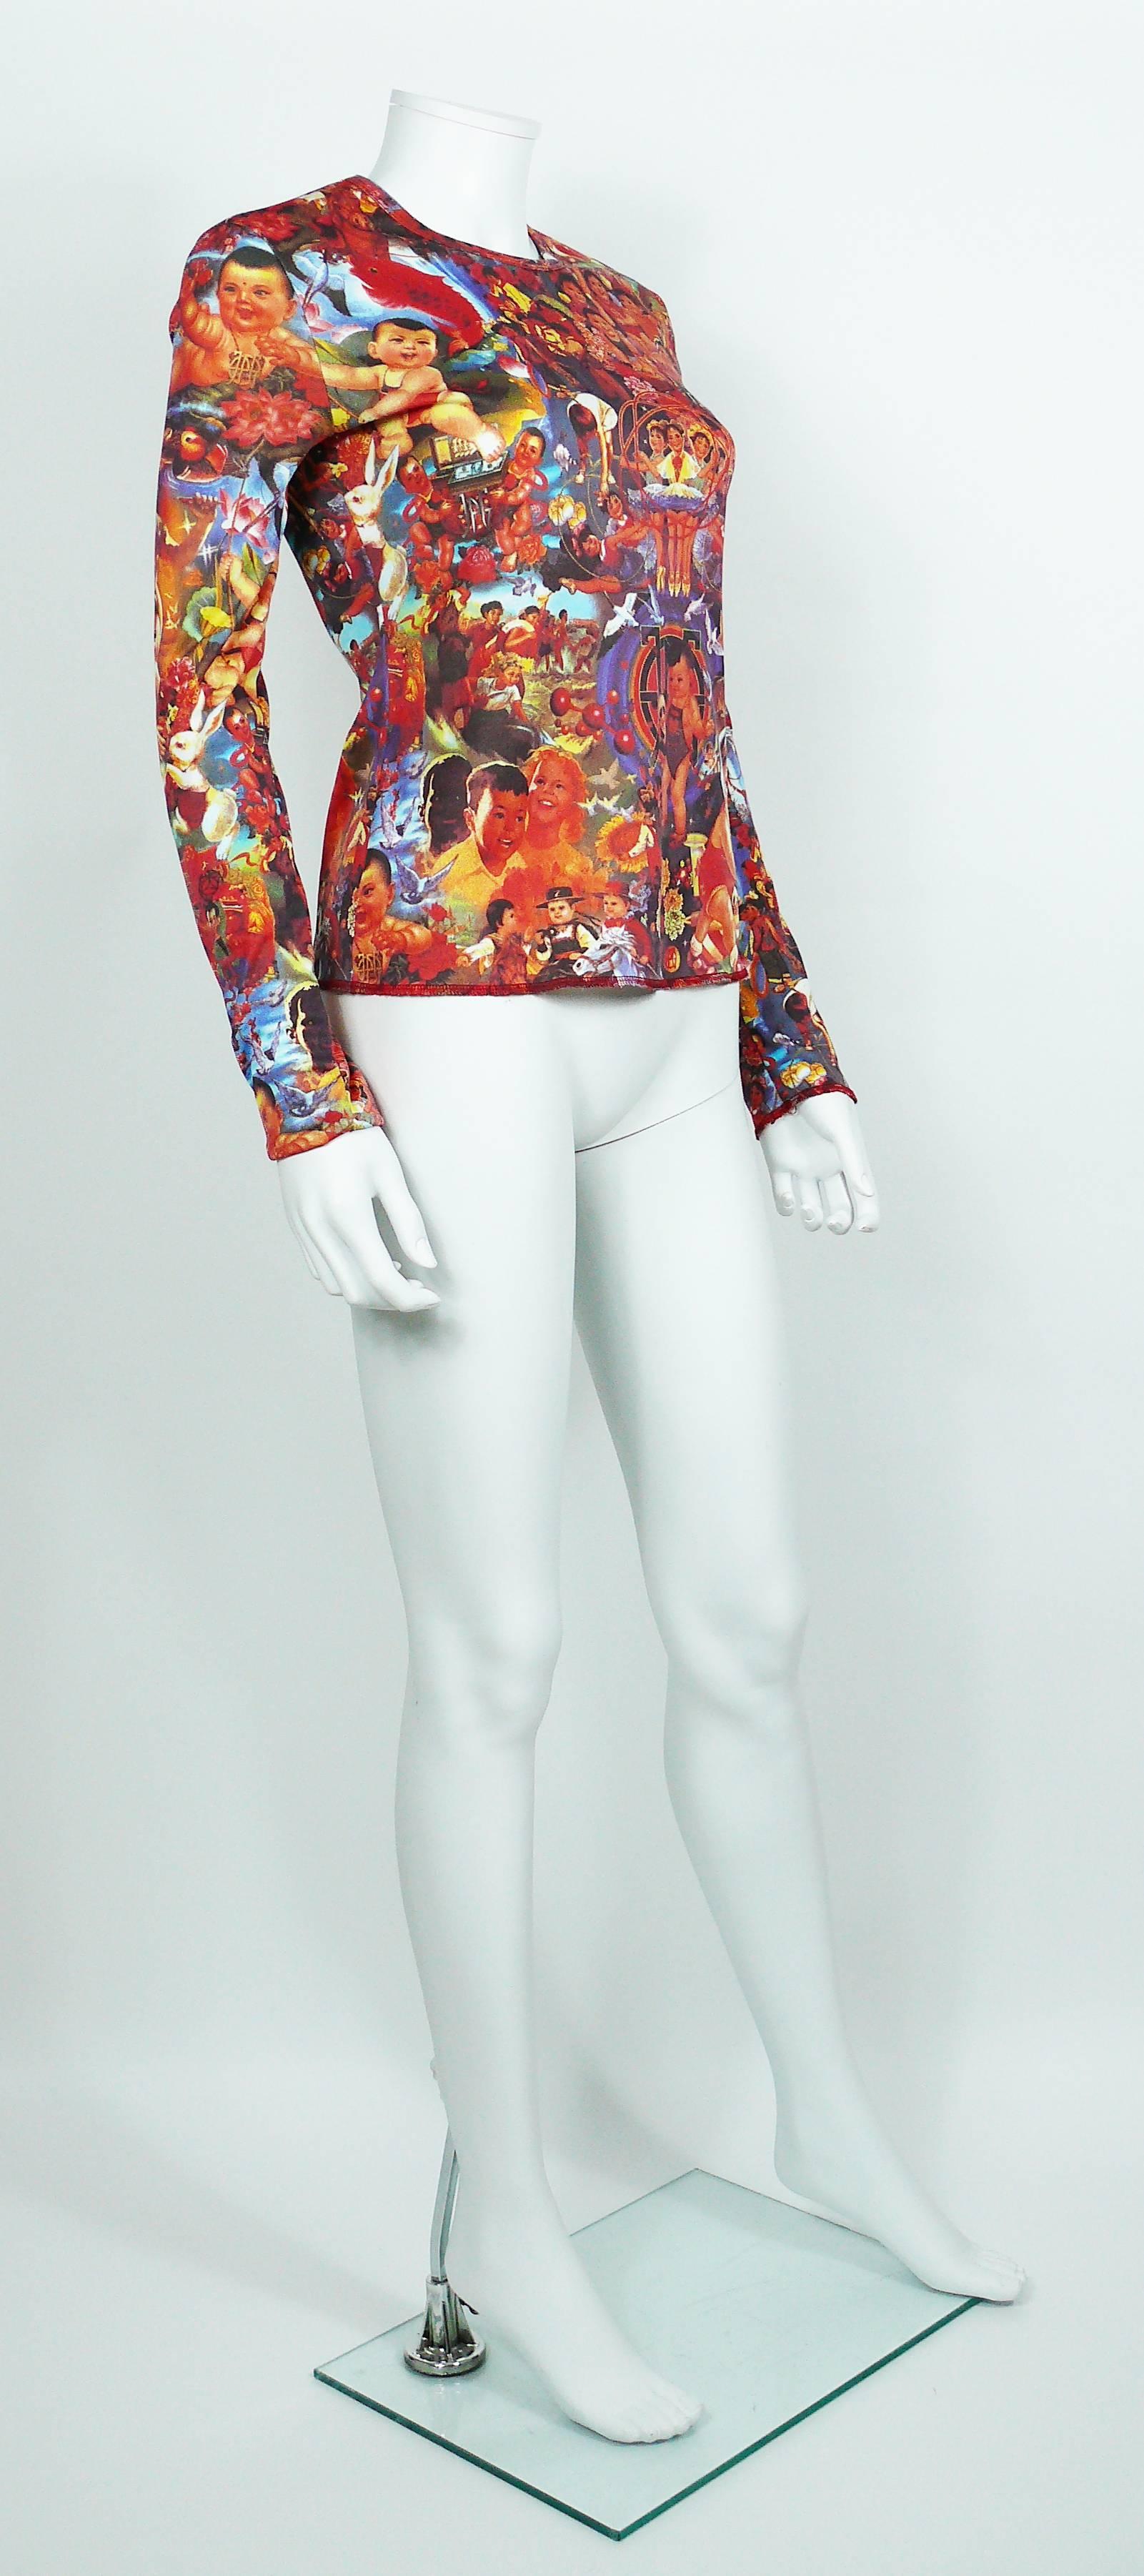 JEAN PAUL GAULTIER vintage multicolour Chinese propaganda print top featuring babies and children.

Round neck.
Long sleeves.

Label reads JPG JEAN'S Made in Italy.
Collection n°0002.

No composition label.
No size label.

Indicative measurements